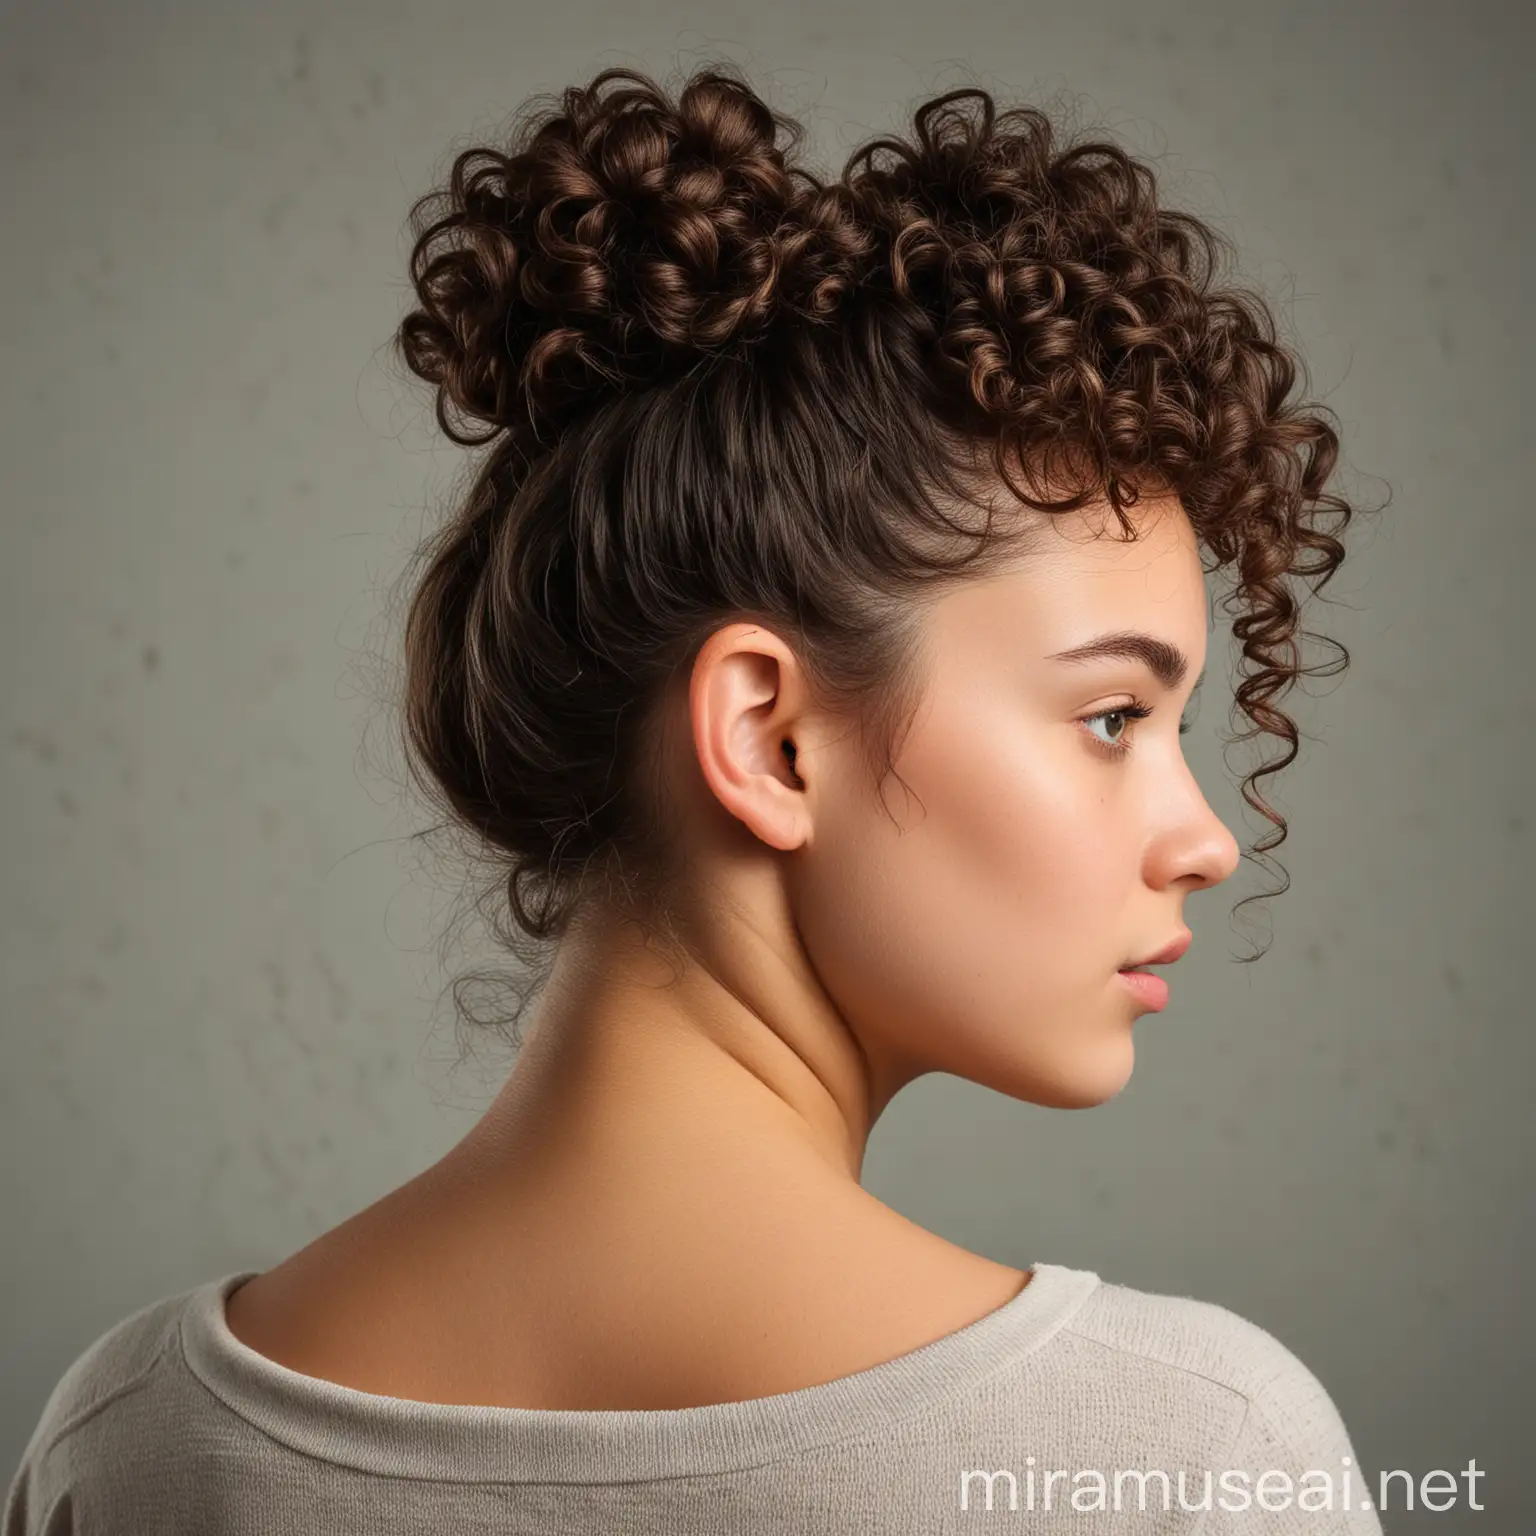 young woman with curly hair in a bun turning her head to the right away from the front